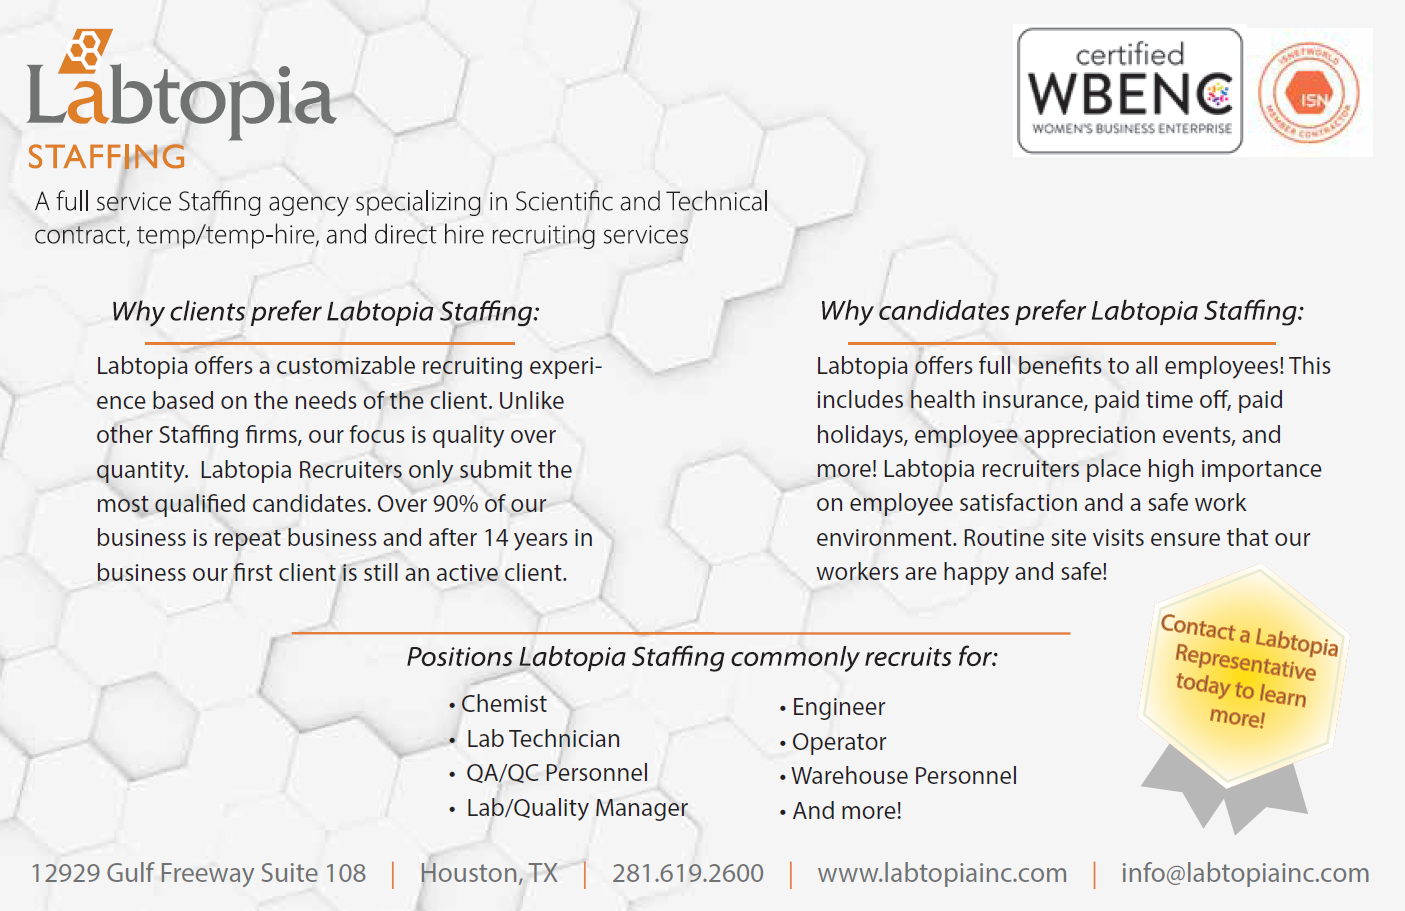 Benefits of Labtopia Staffing